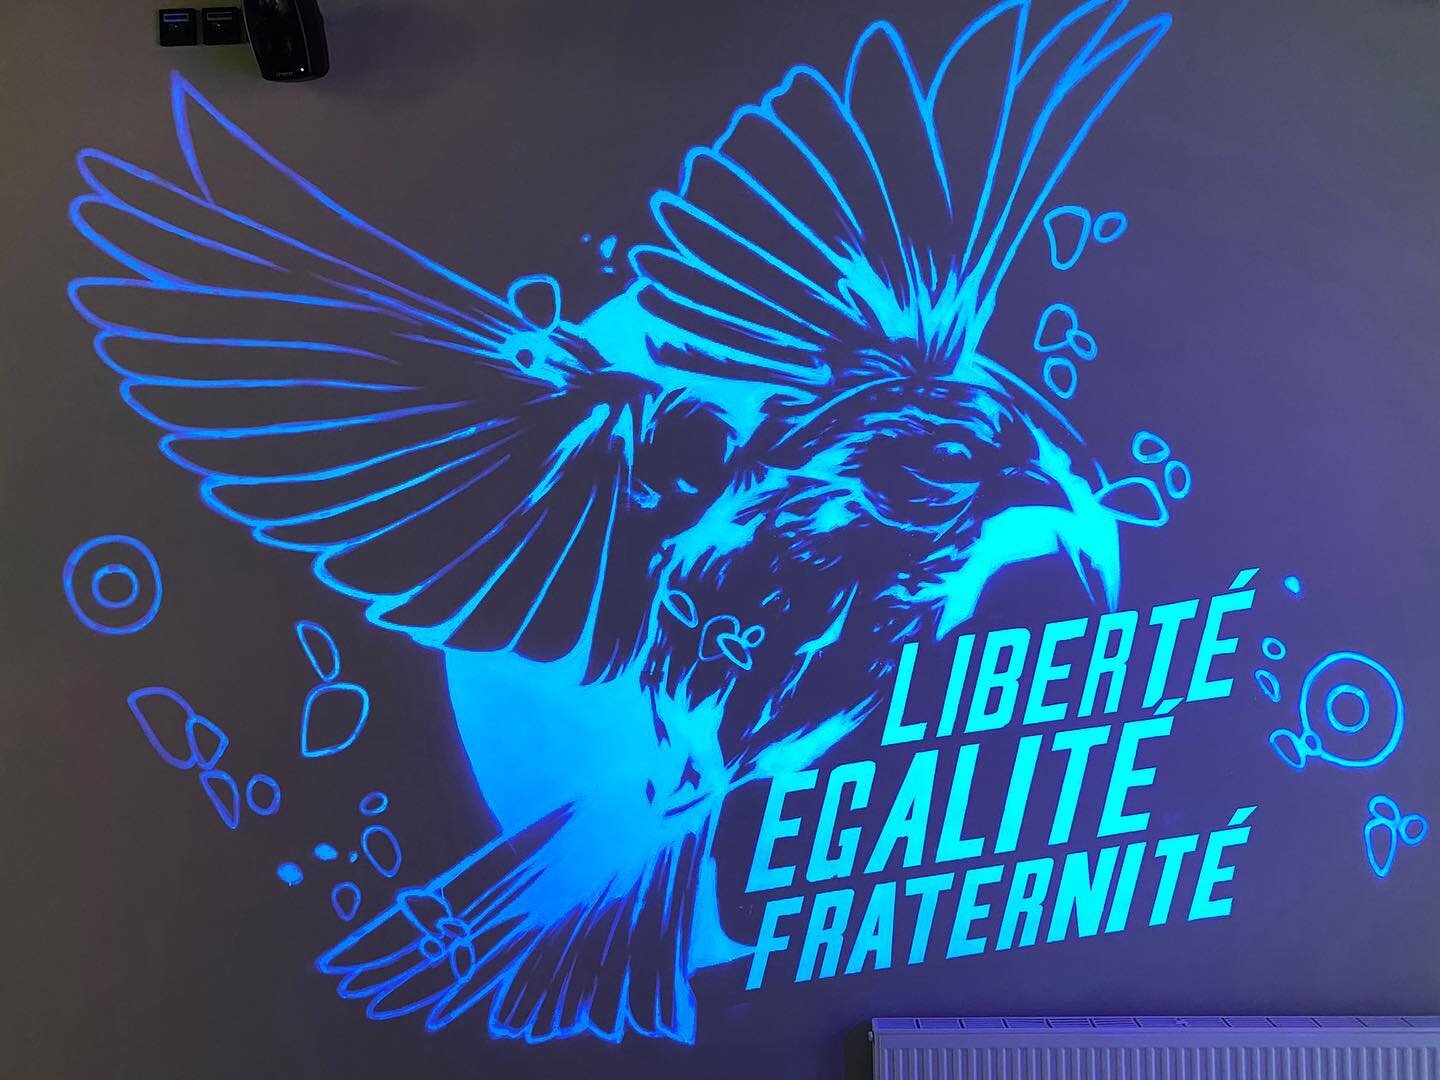 Libert&eacute; Egalit&eacute; Fraternit&eacute; 🕊⠀
⠀
⠀
A UV piece I painted earlier this year while in Malm&ouml; working with @artscape_festival ⠀
⠀
📍 Arena Triangln for @vasakronanab ⠀
⠀
Painted this all with Montana UV paint under black light an